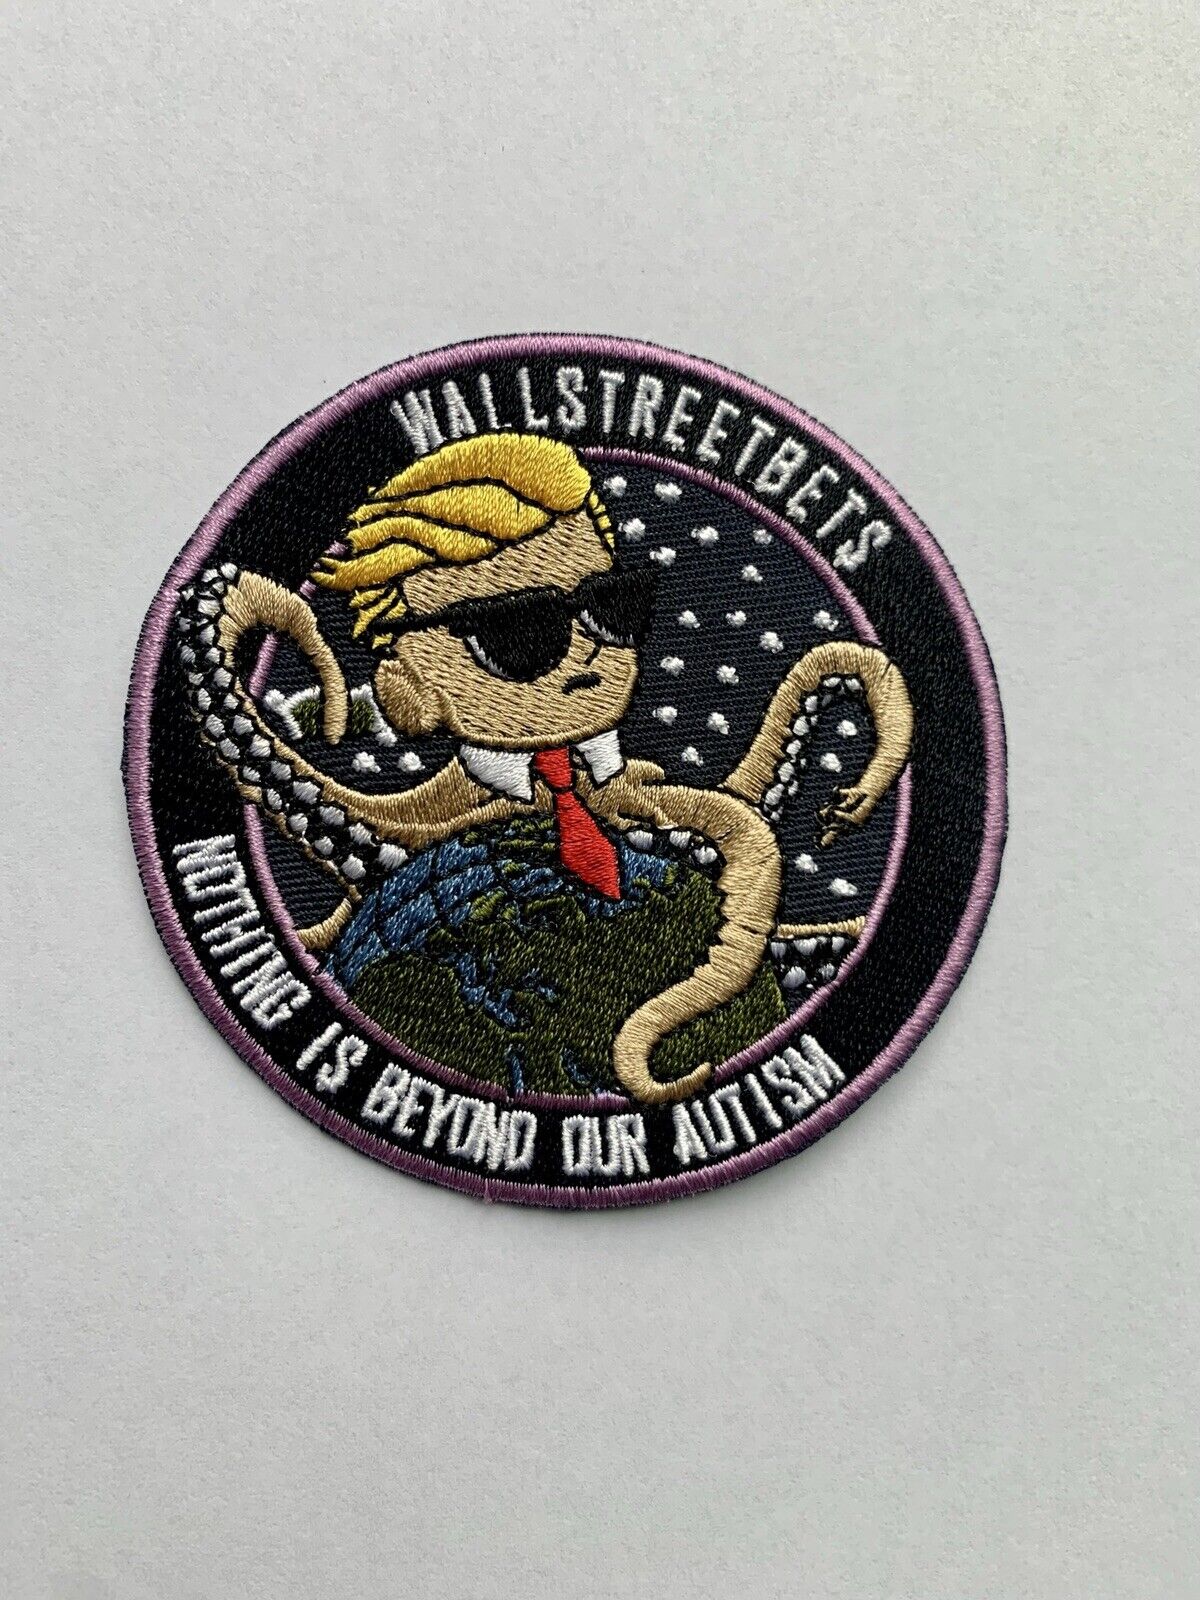 Wall Street Bets Morale Patch Reddit Iron On Sew On Patch 3.5”